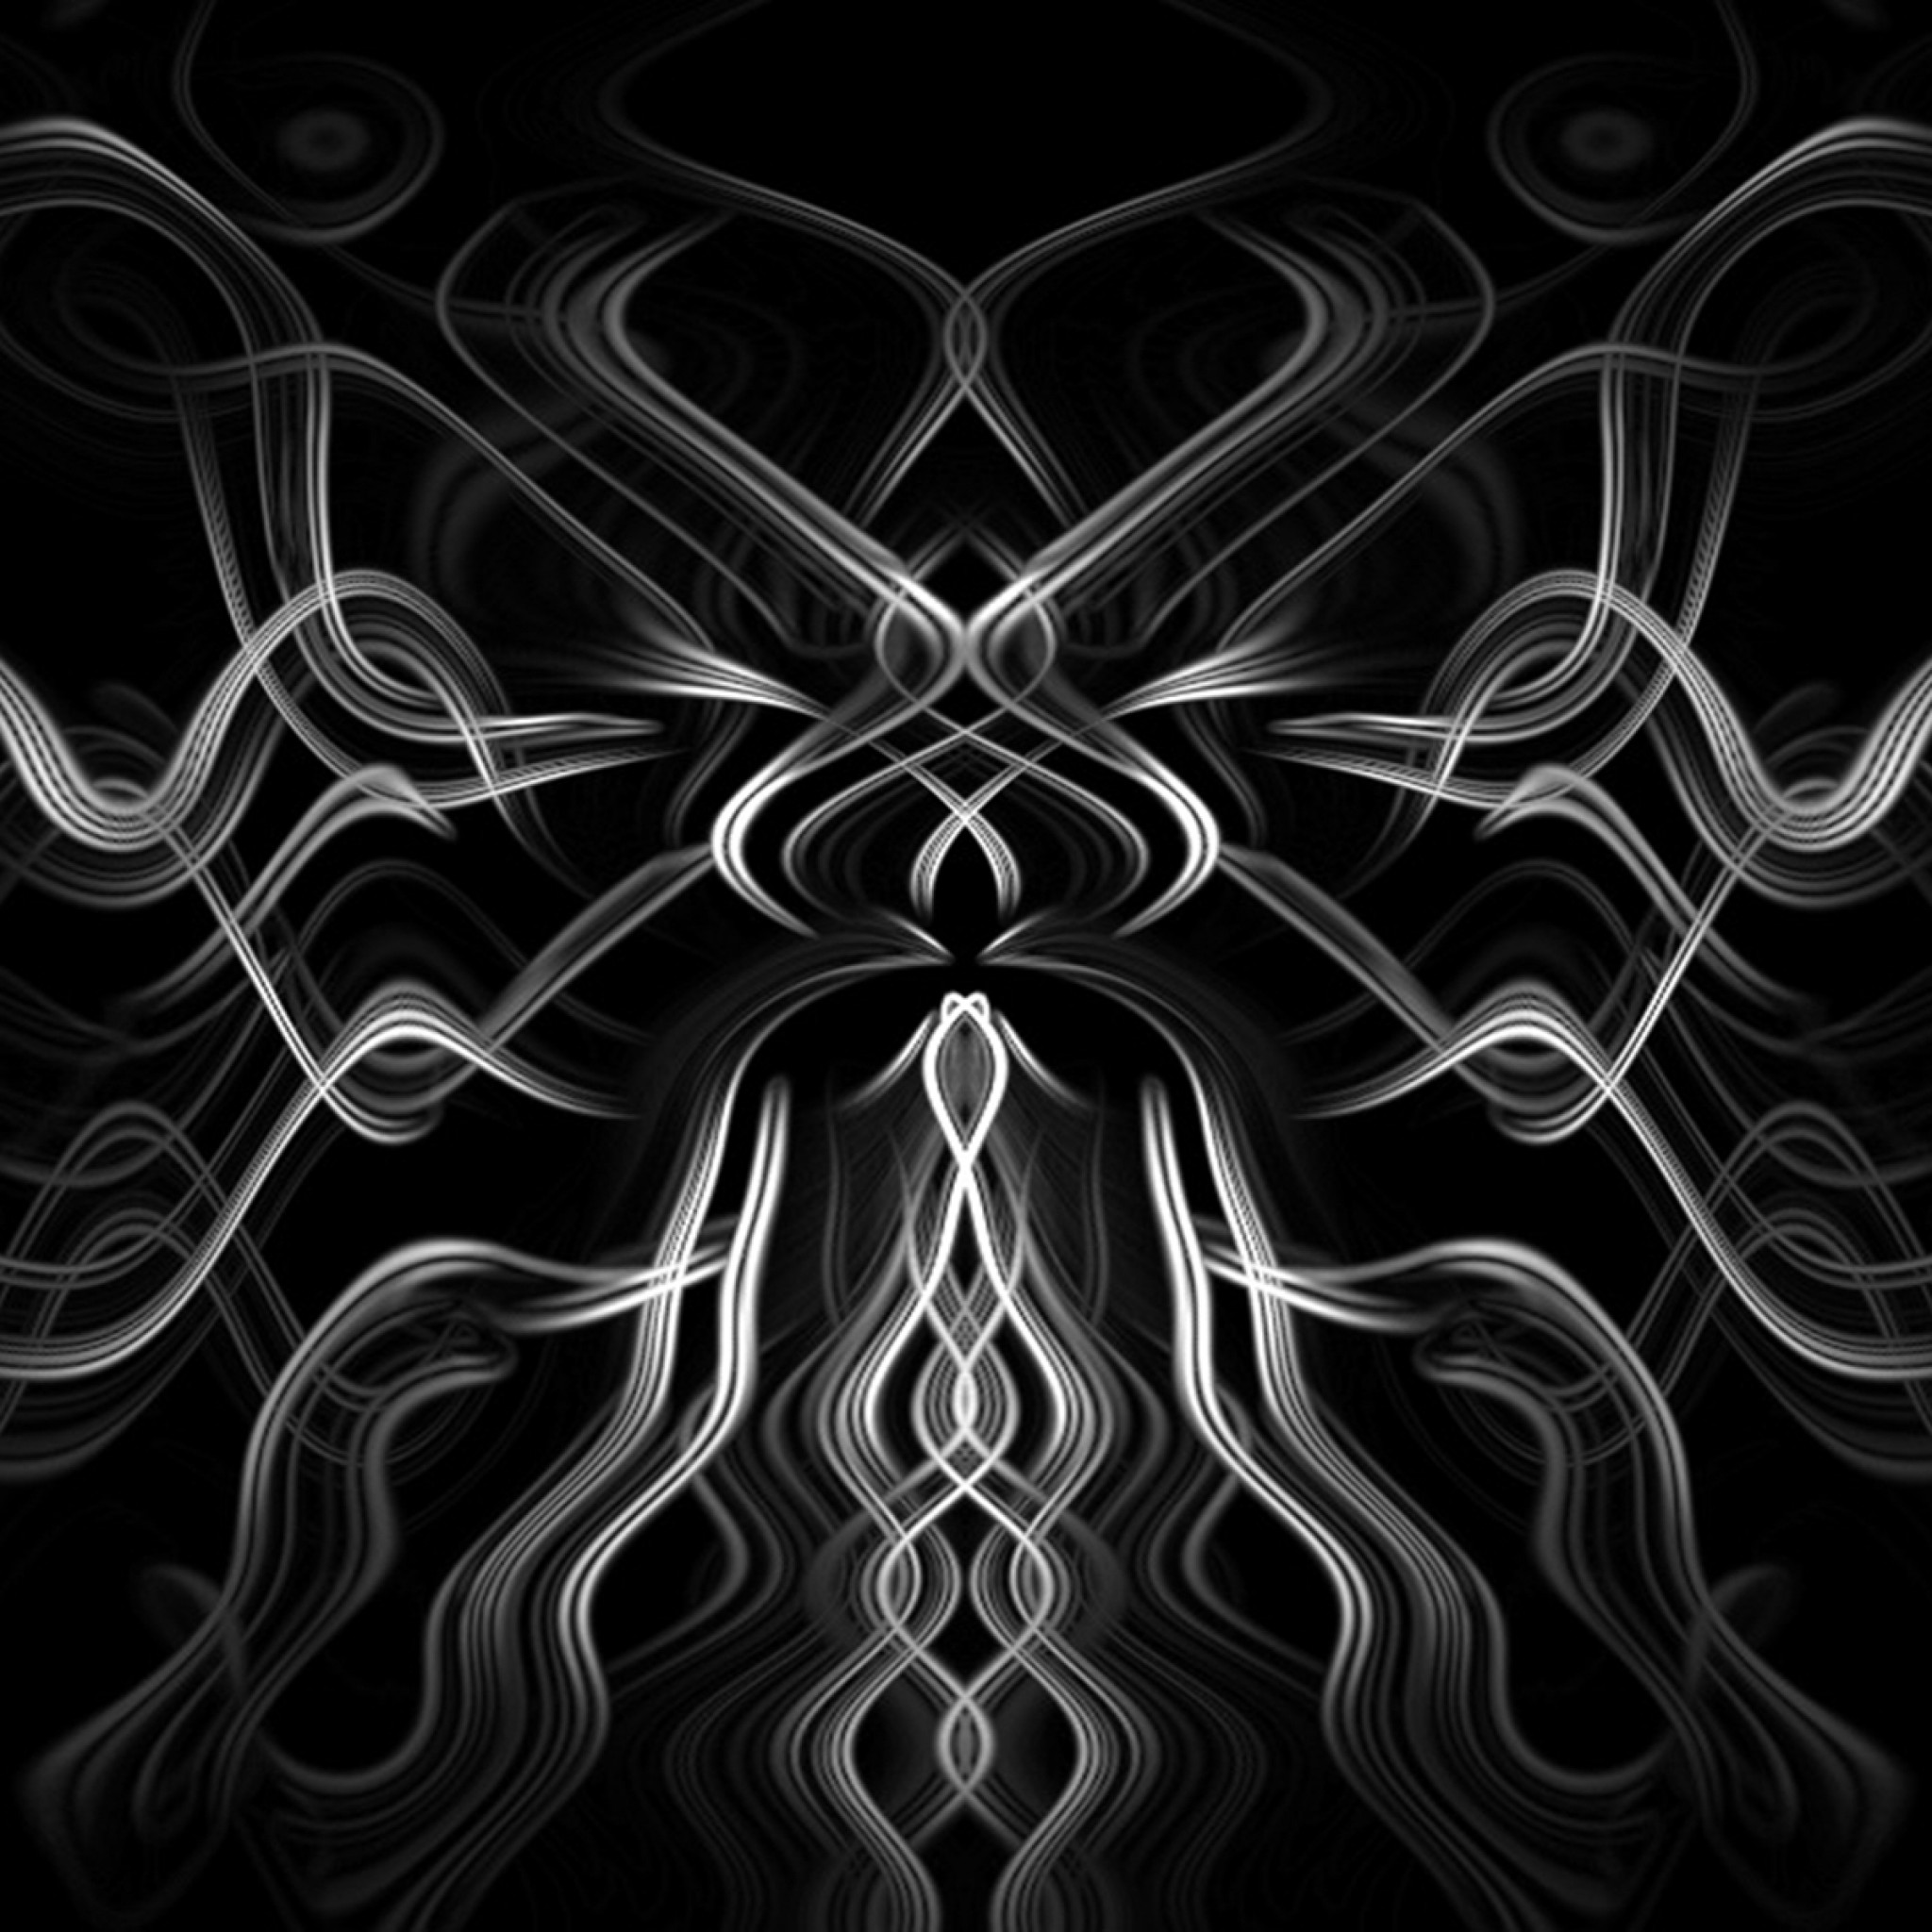 Images For Tribal Wallpaper Iphone Ipad タブレット壁紙ギャラリー